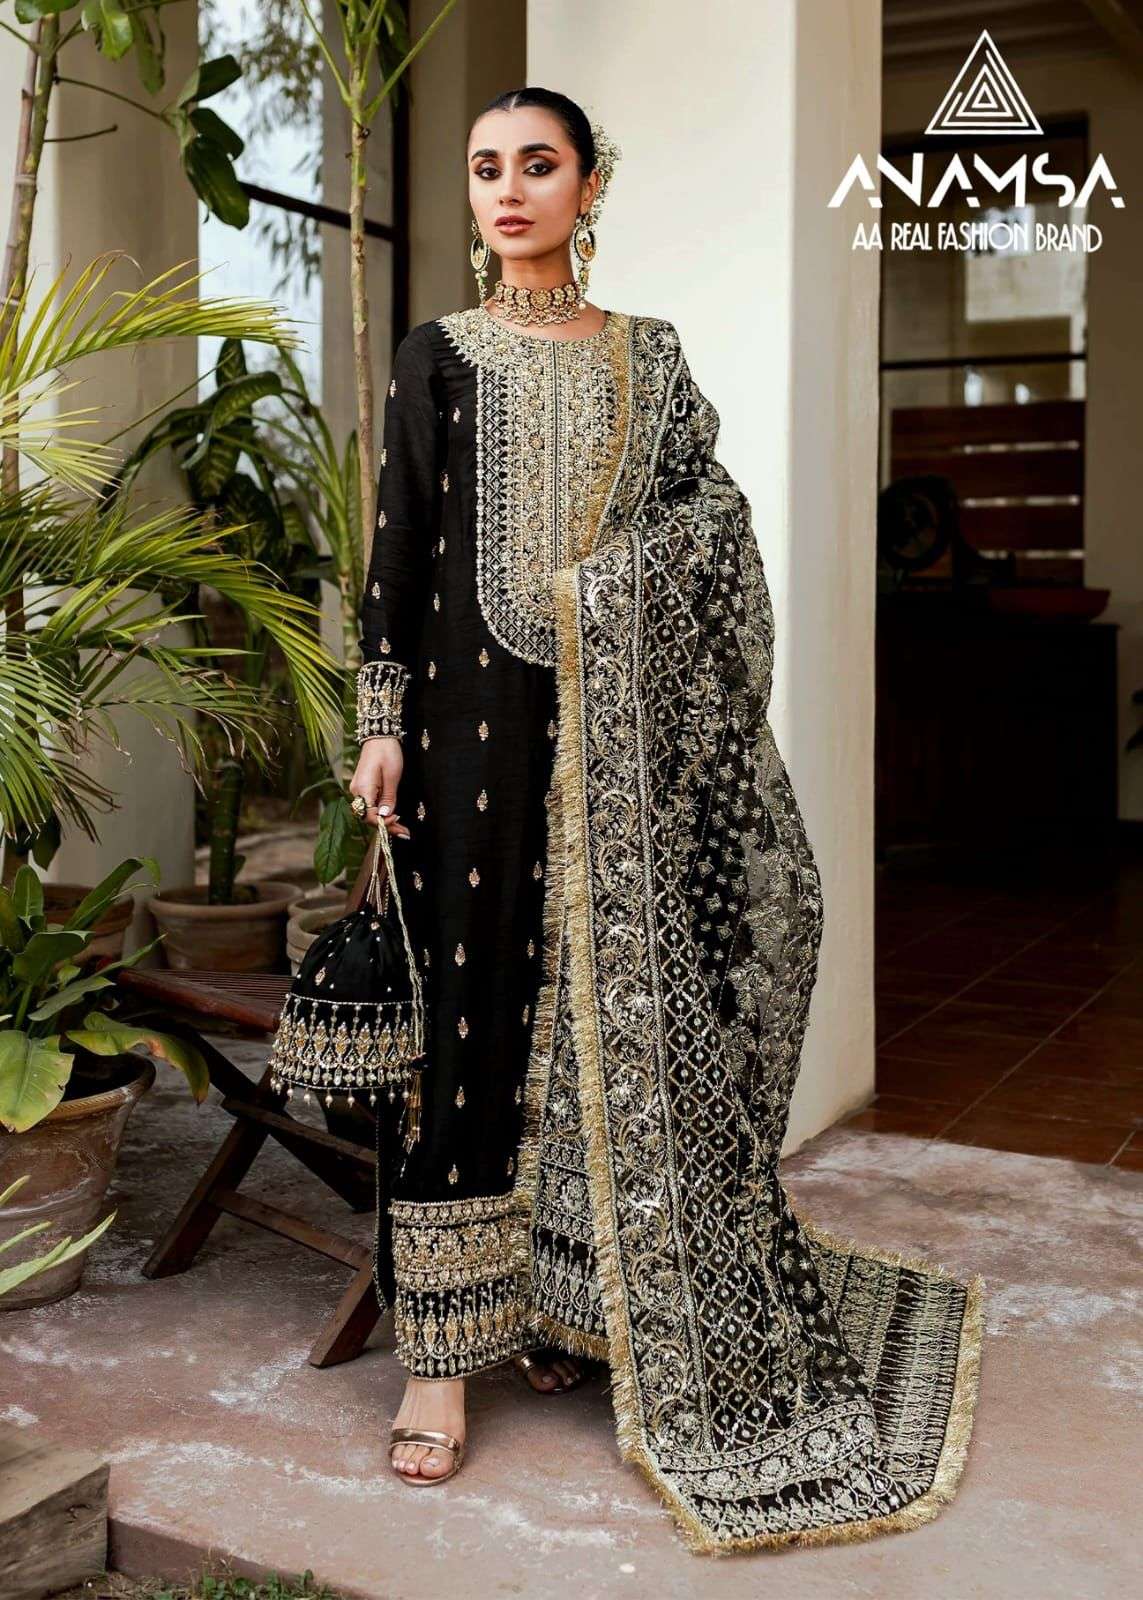 Anamsa 294 GEORGETTE WITH EMBROIDERY WORK BLACK COLOUR PAKIS...